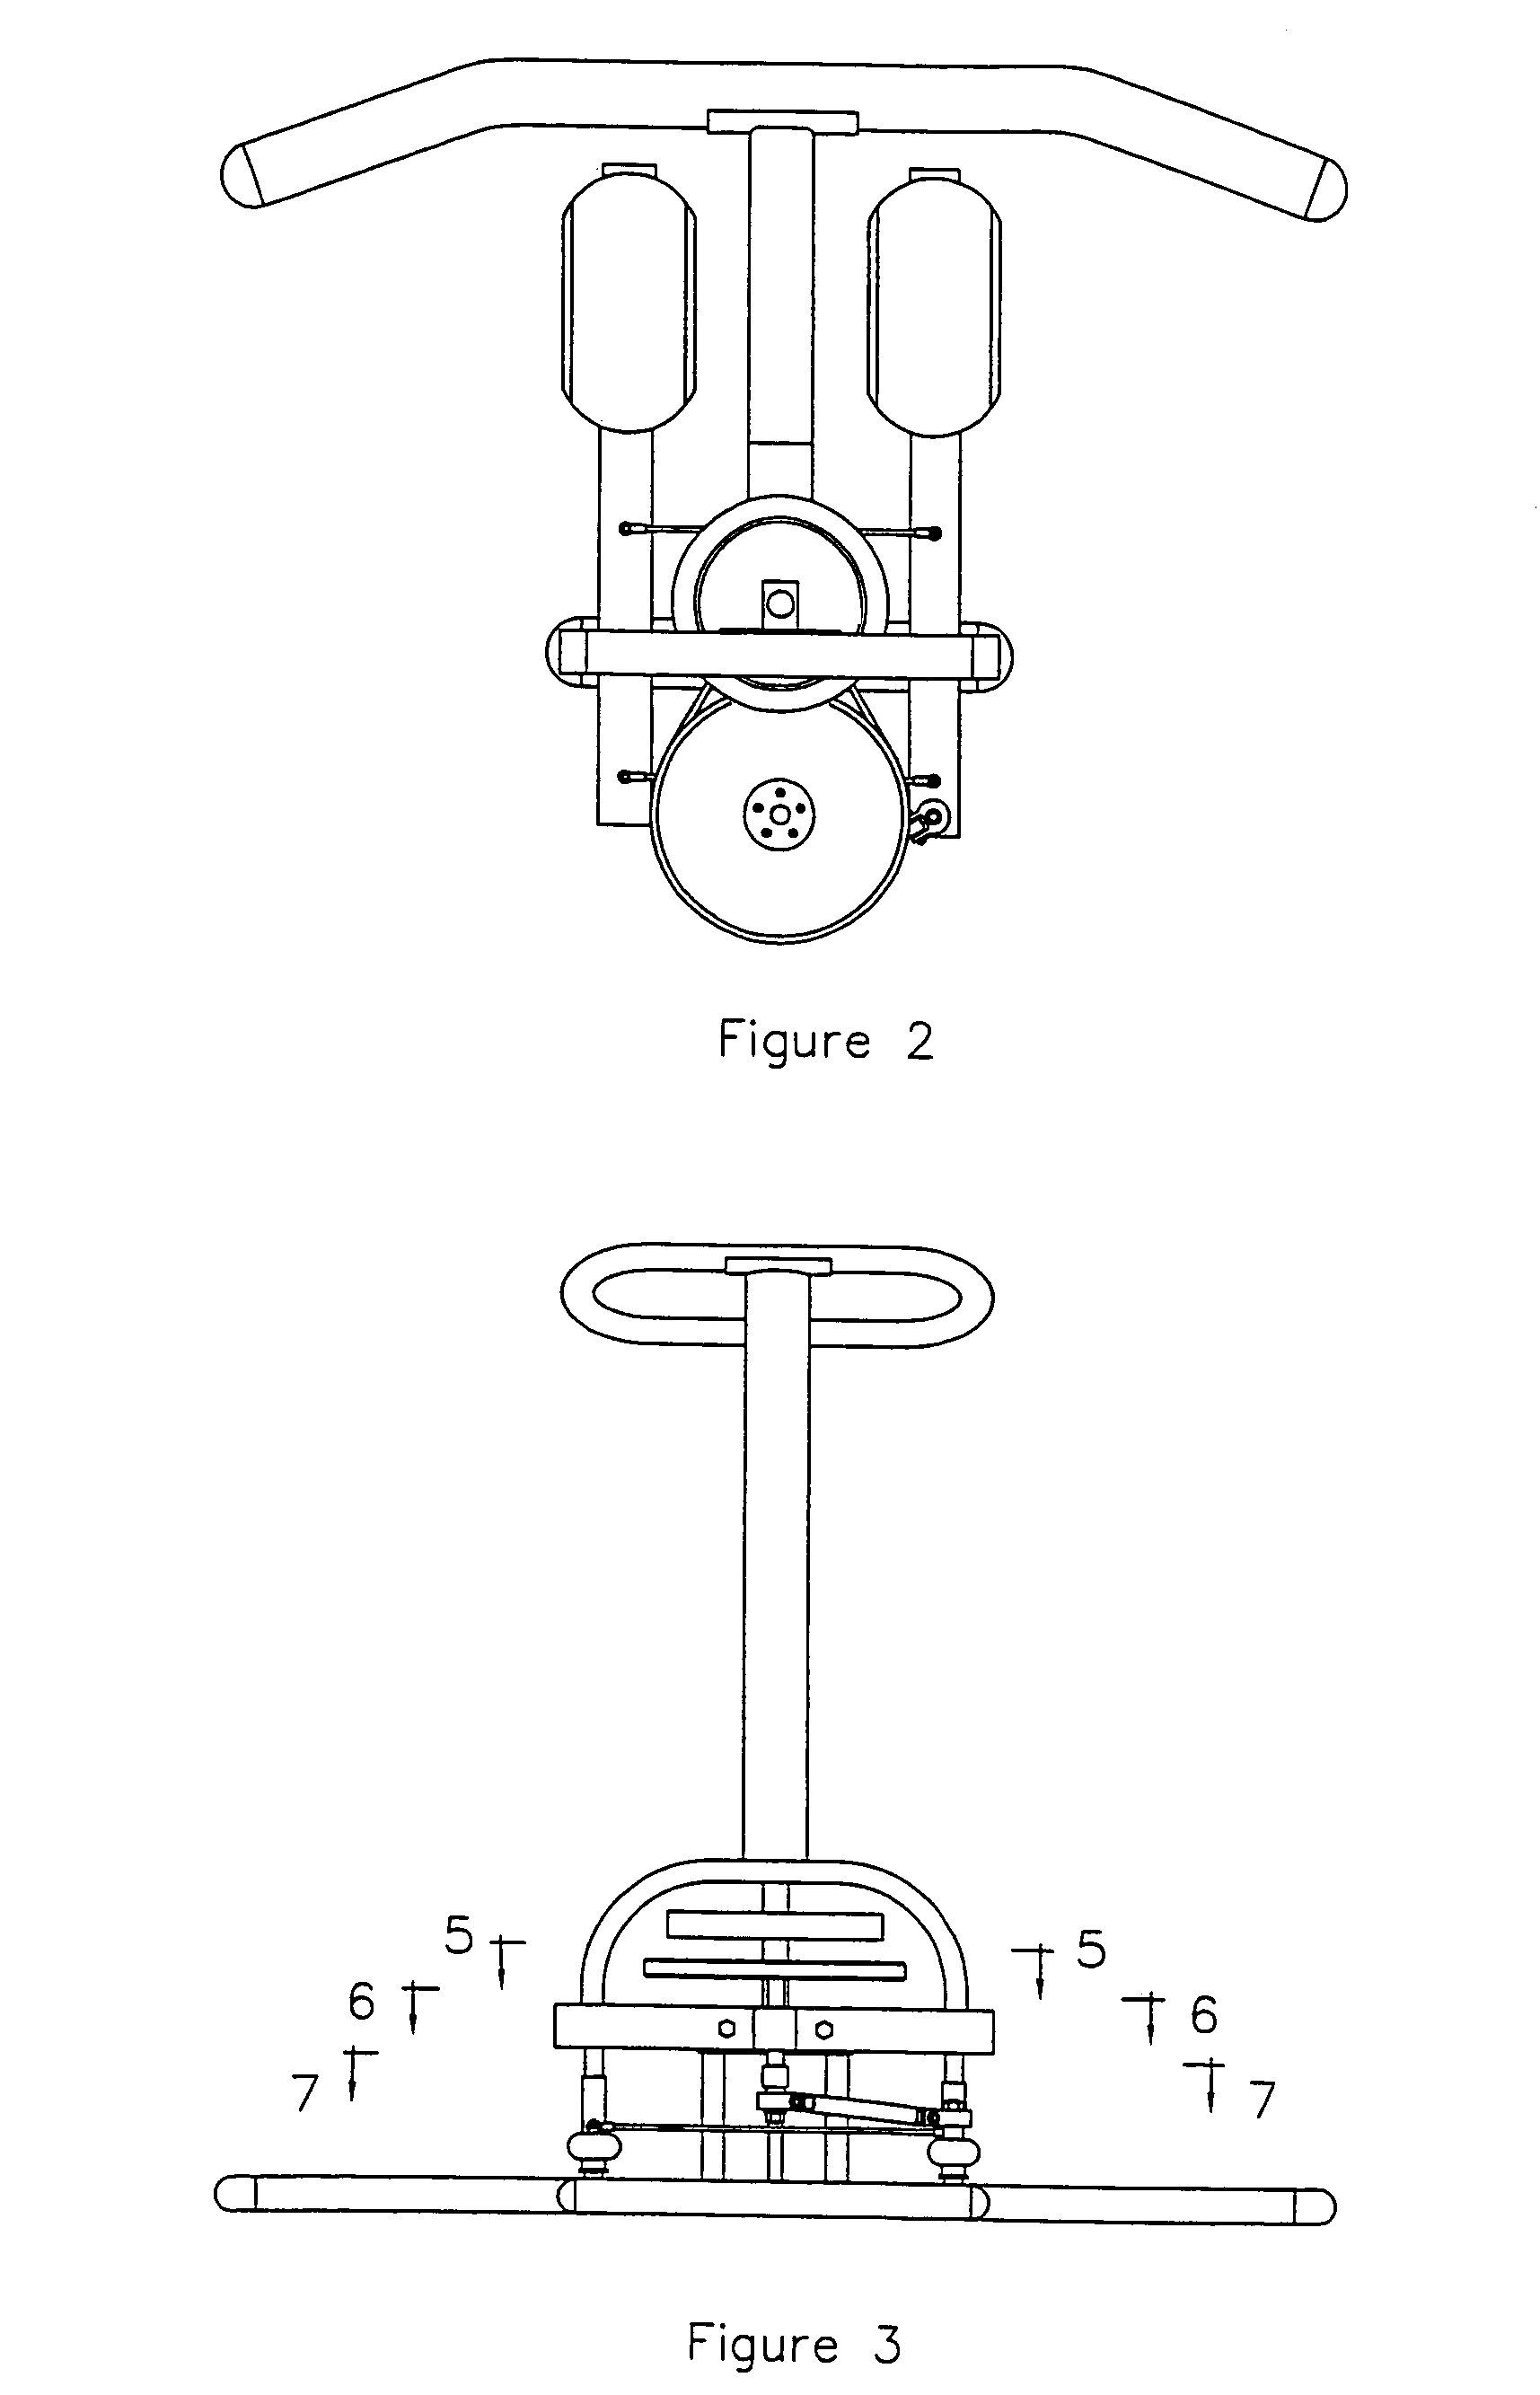 Apparatus to enable a user to simulate skating